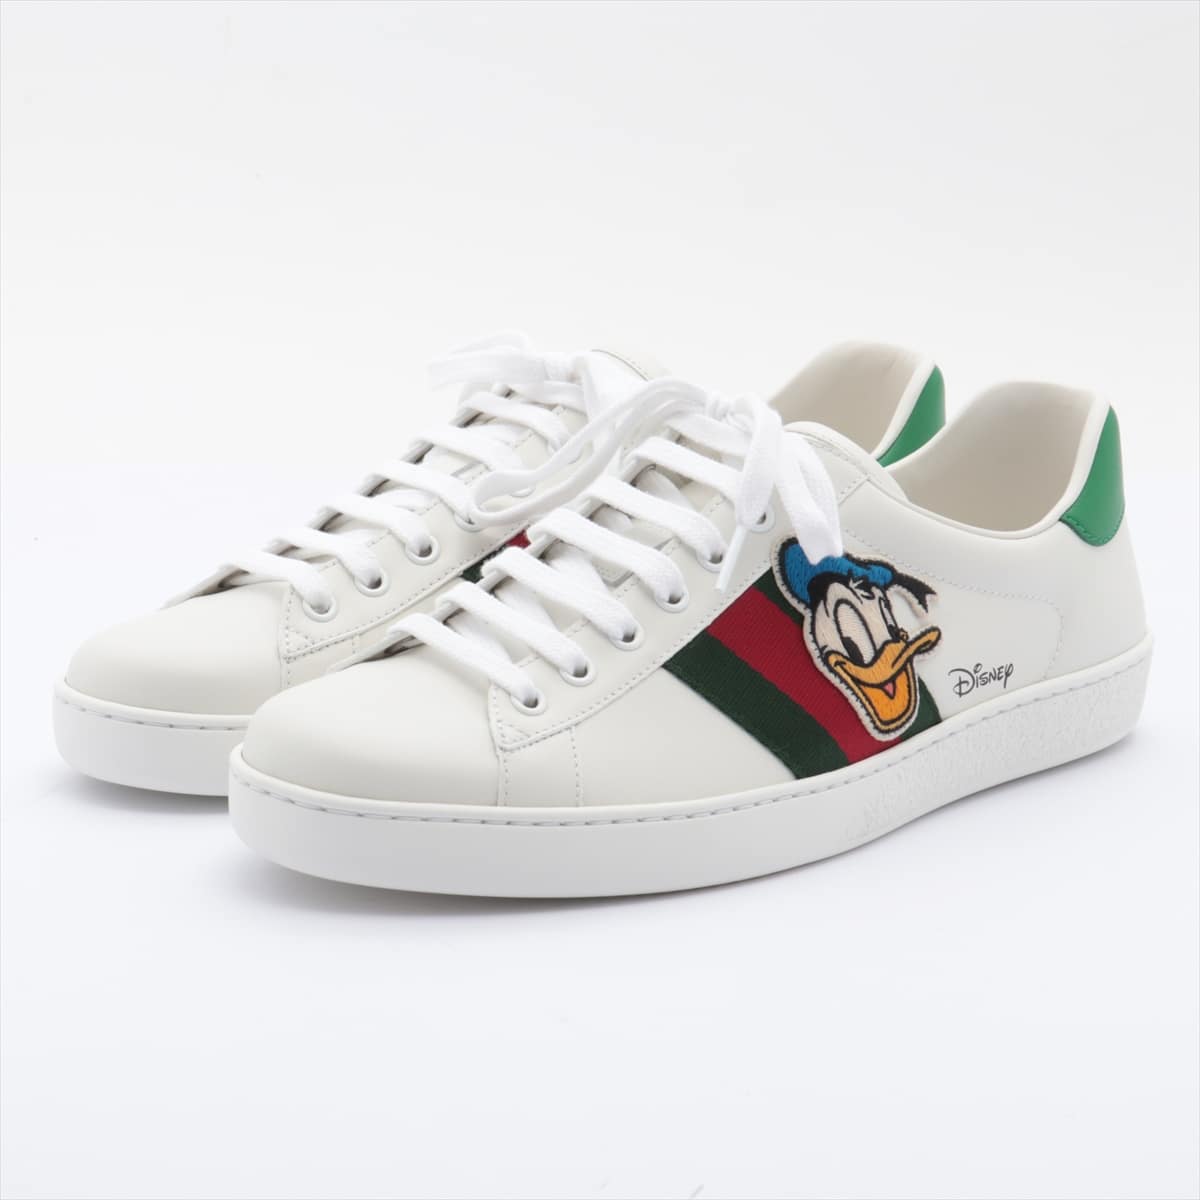 Gucci x Disney ACE Leather Sneakers 8 1/2 Men's White 649399